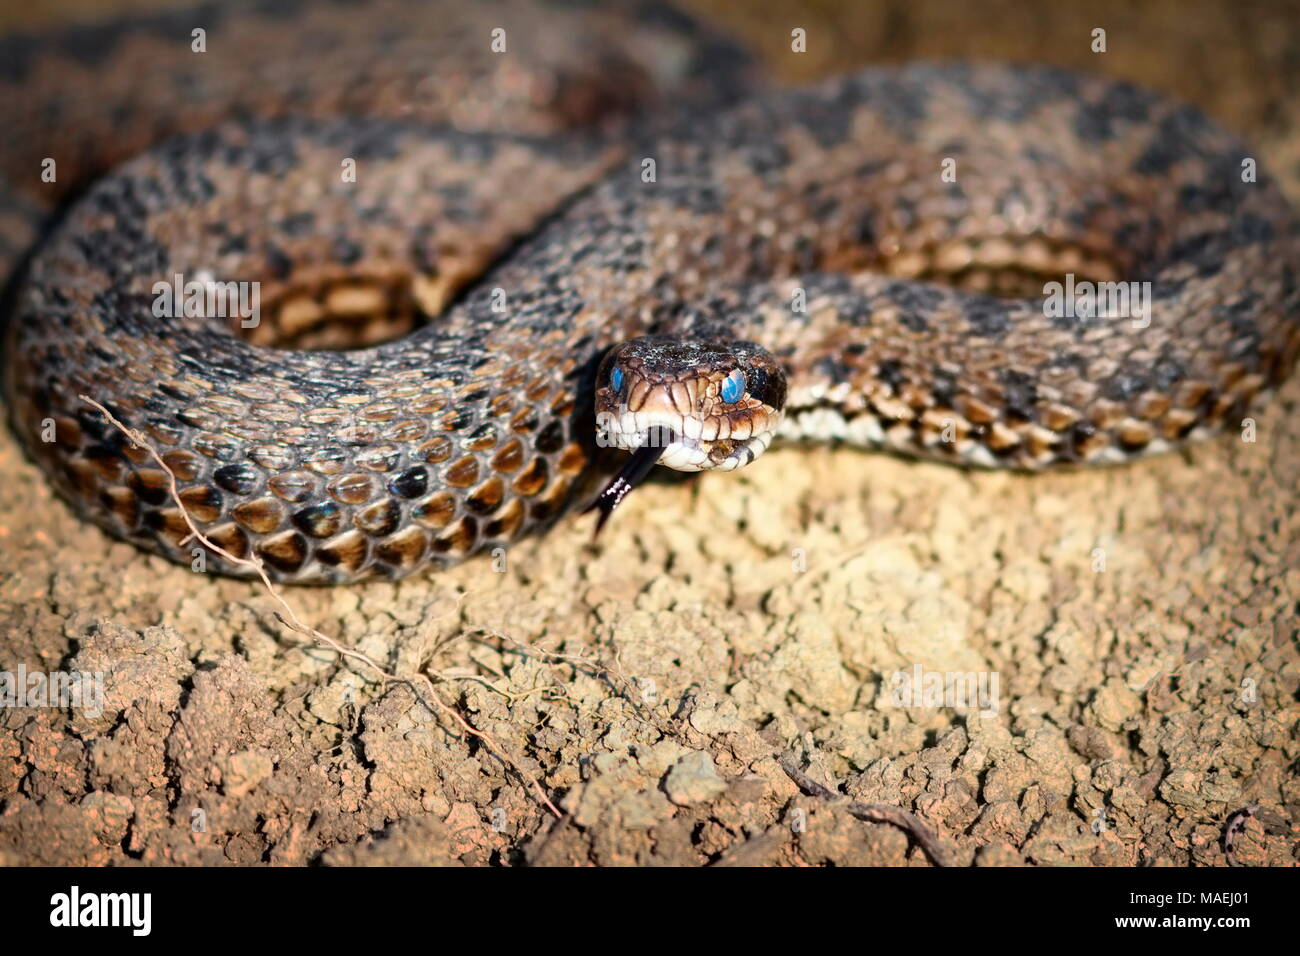 male meadow viper emerged from hibernation ( Vipera ursinii rakosiensis ); reptile ready for sloughing its skin Stock Photo